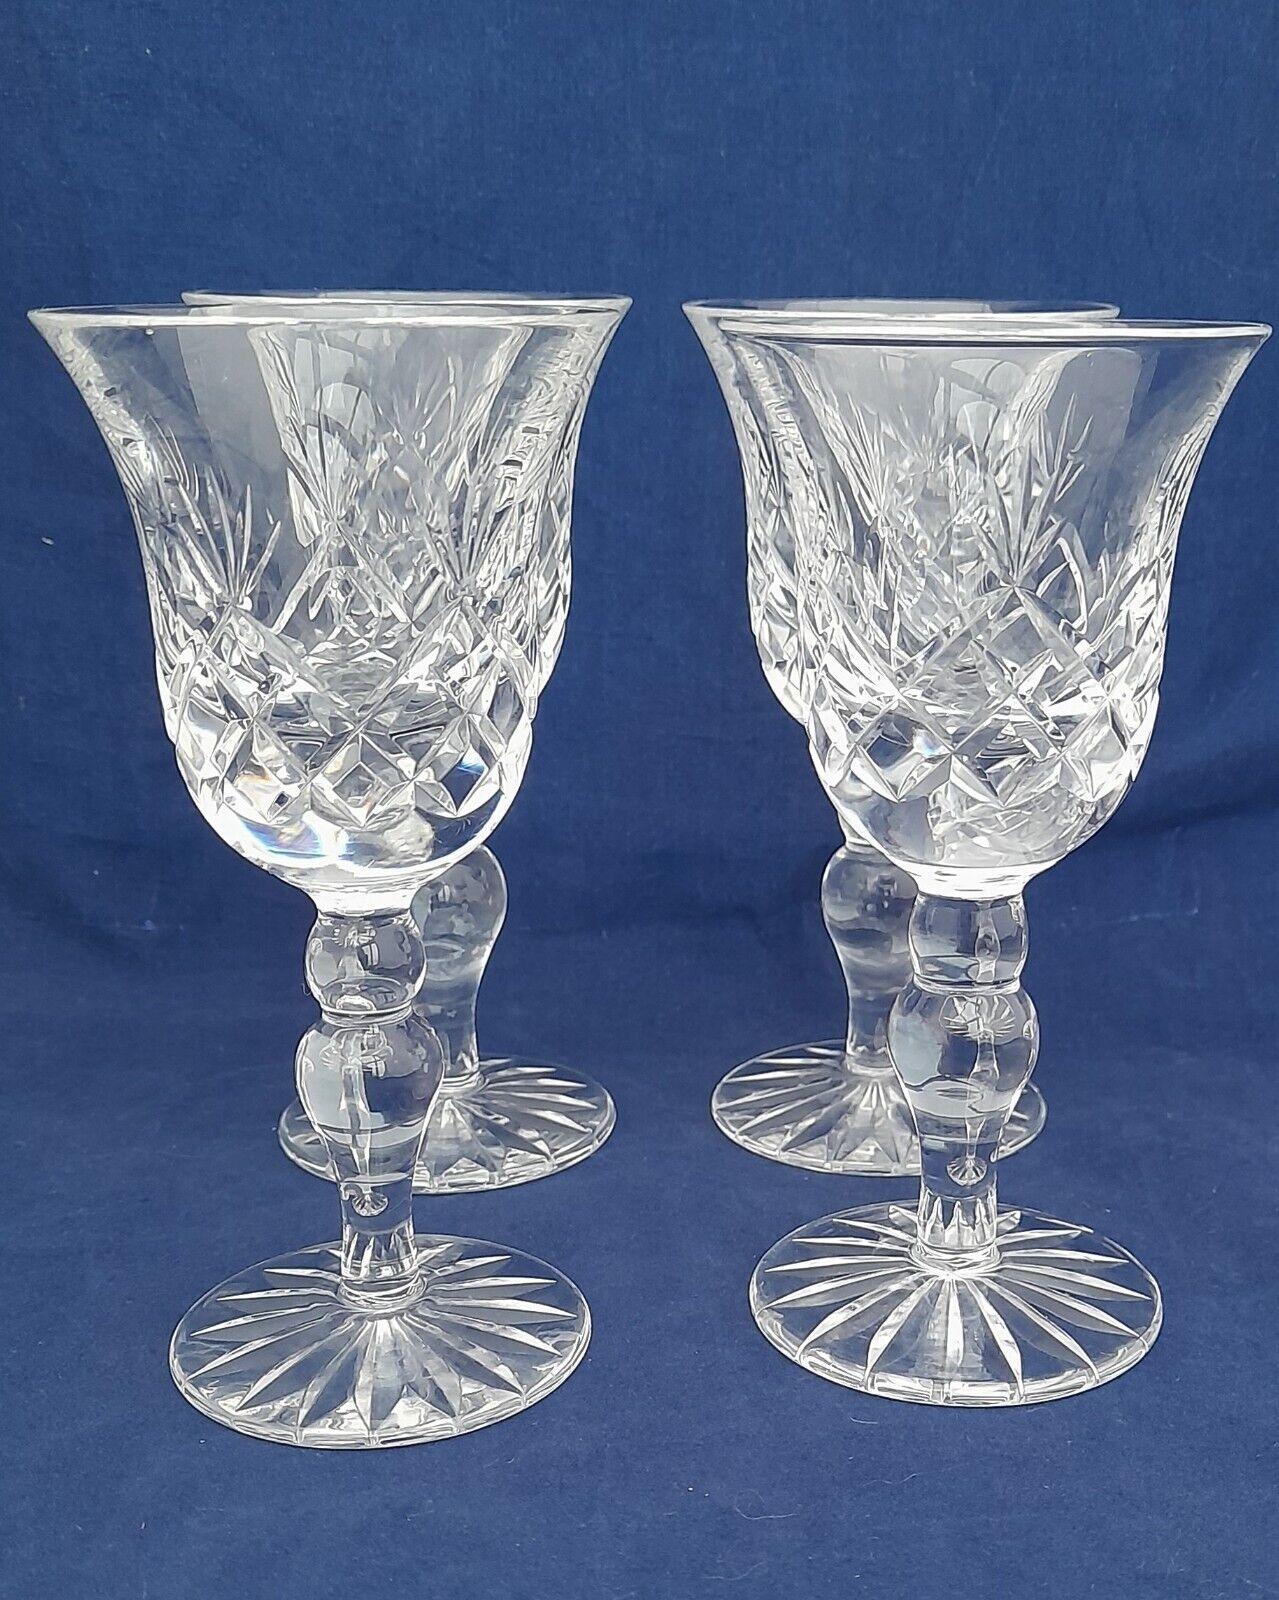 Four Cumbria Crystal Port or Sherry Glasses Keswick Pattern Hand Blown and Cut